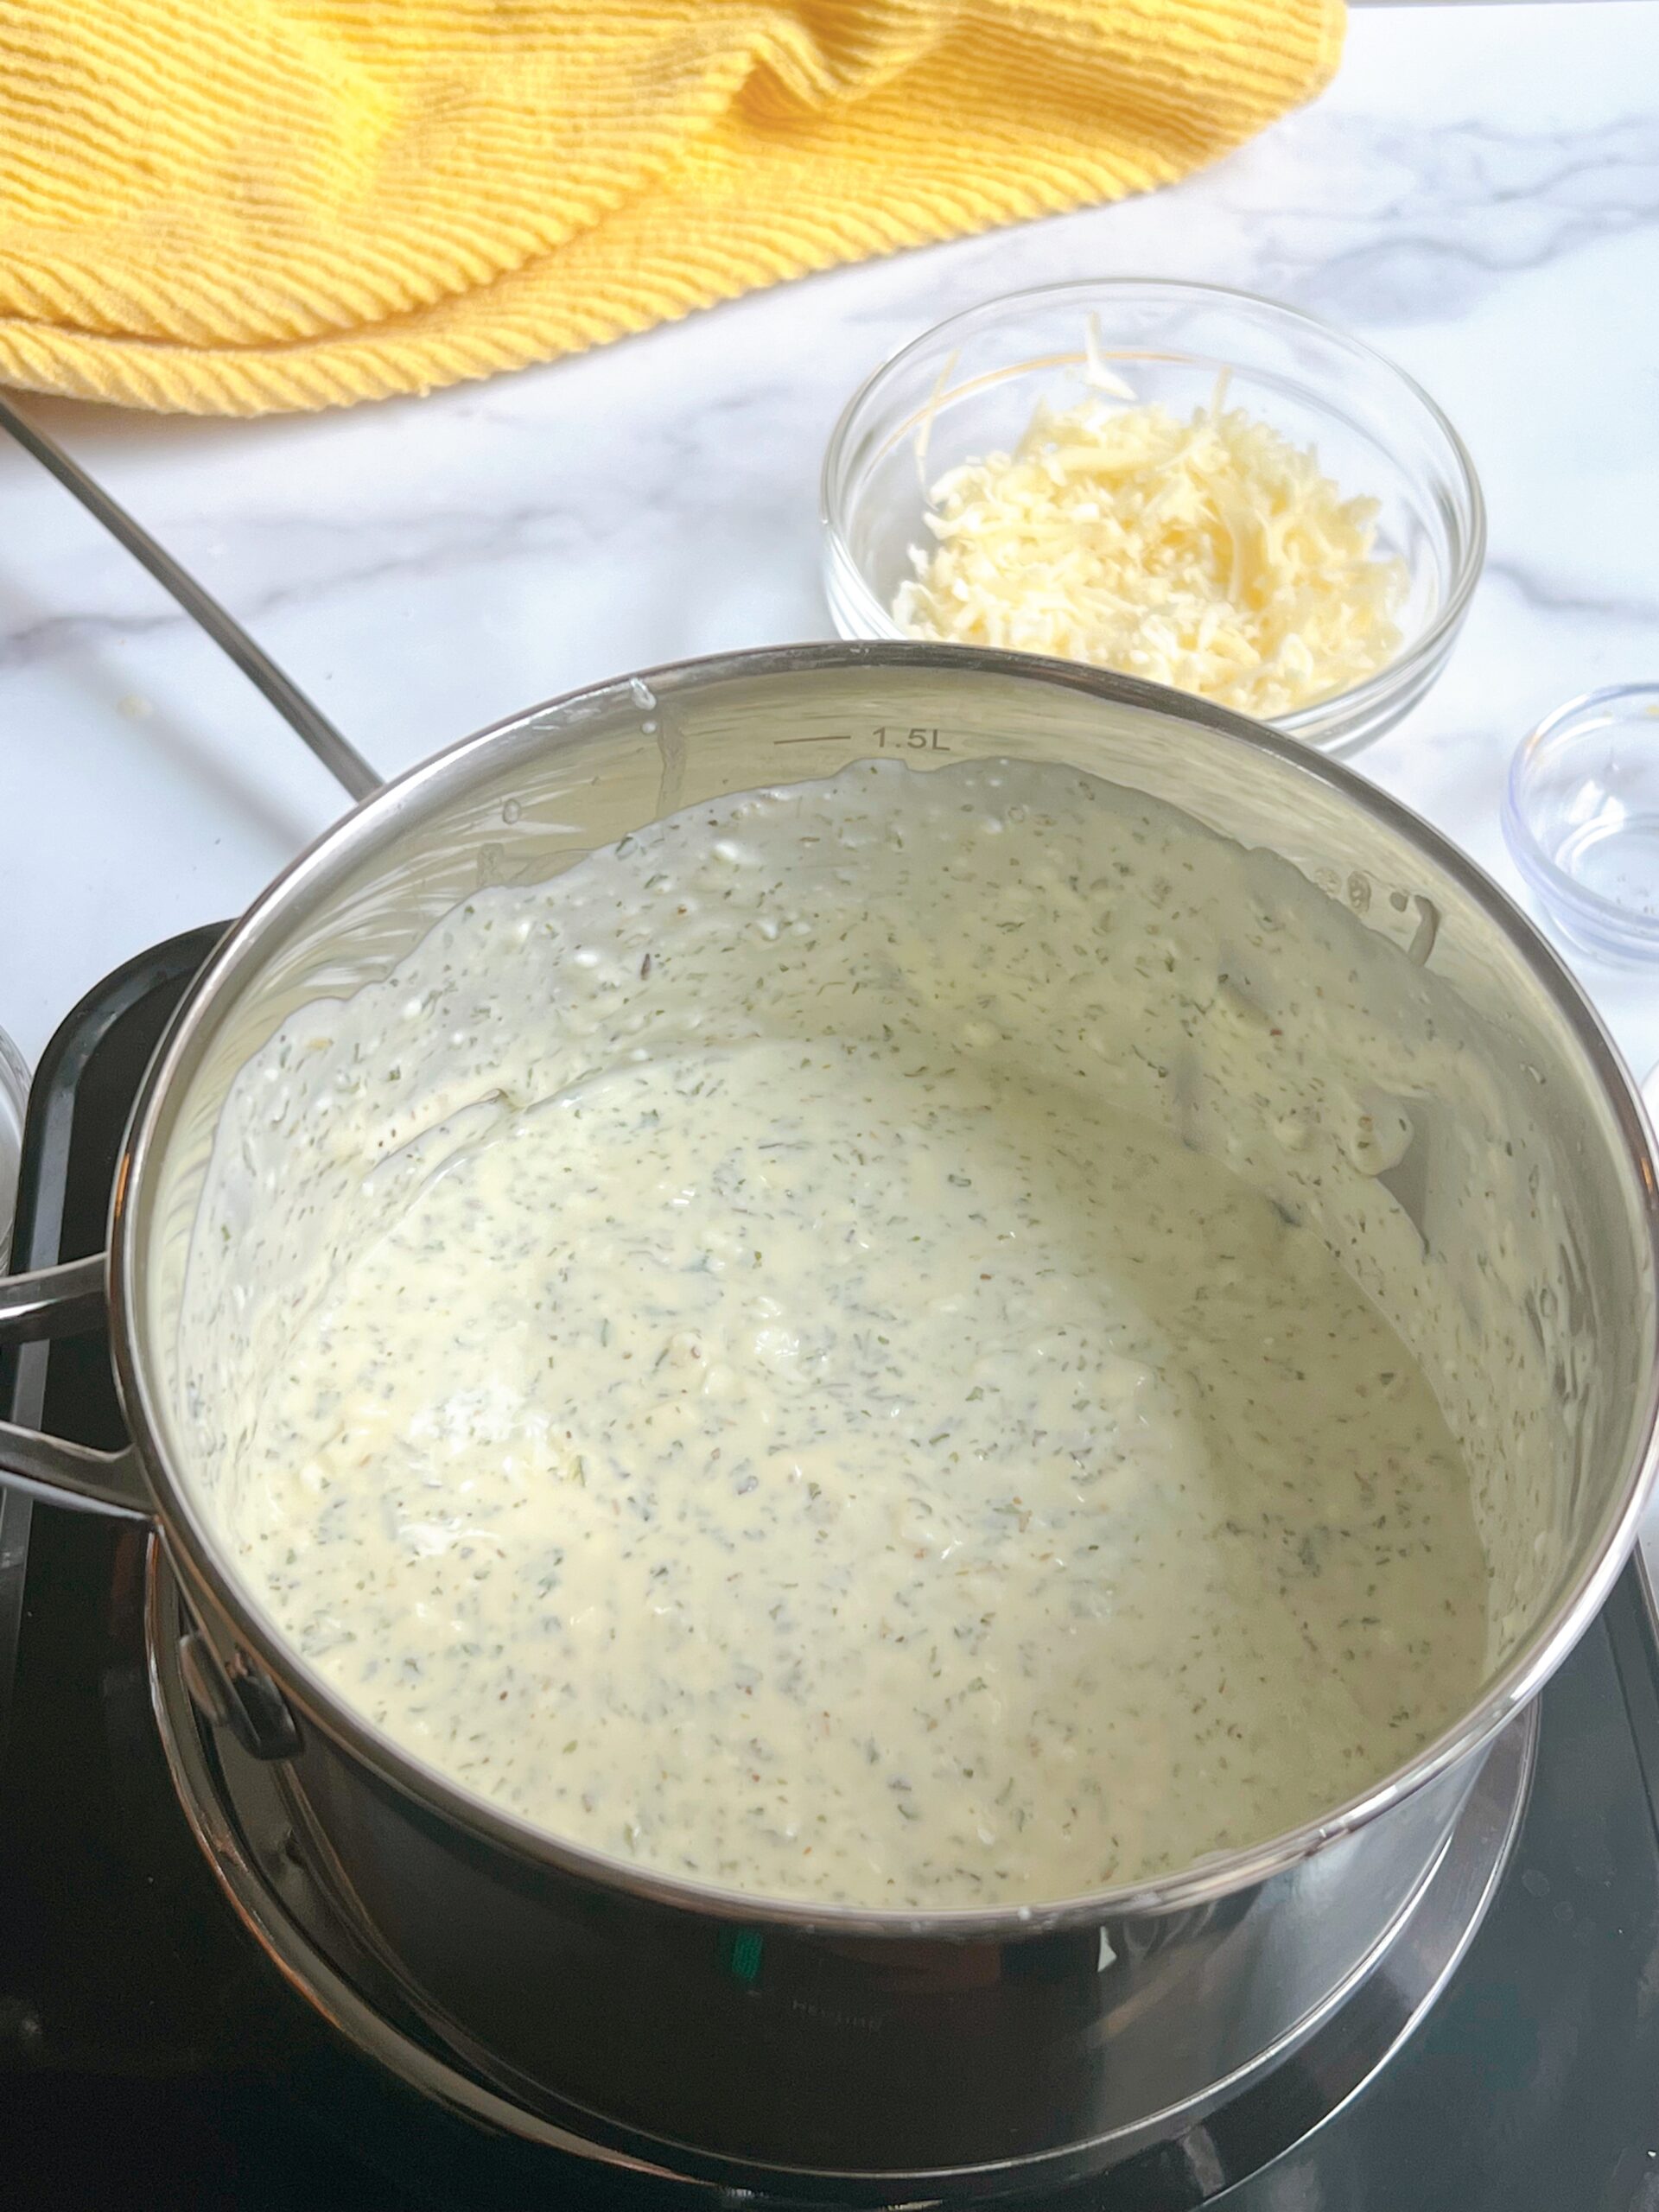 An overhead view of a cream sauce on a burner with visible parsley and tarragon